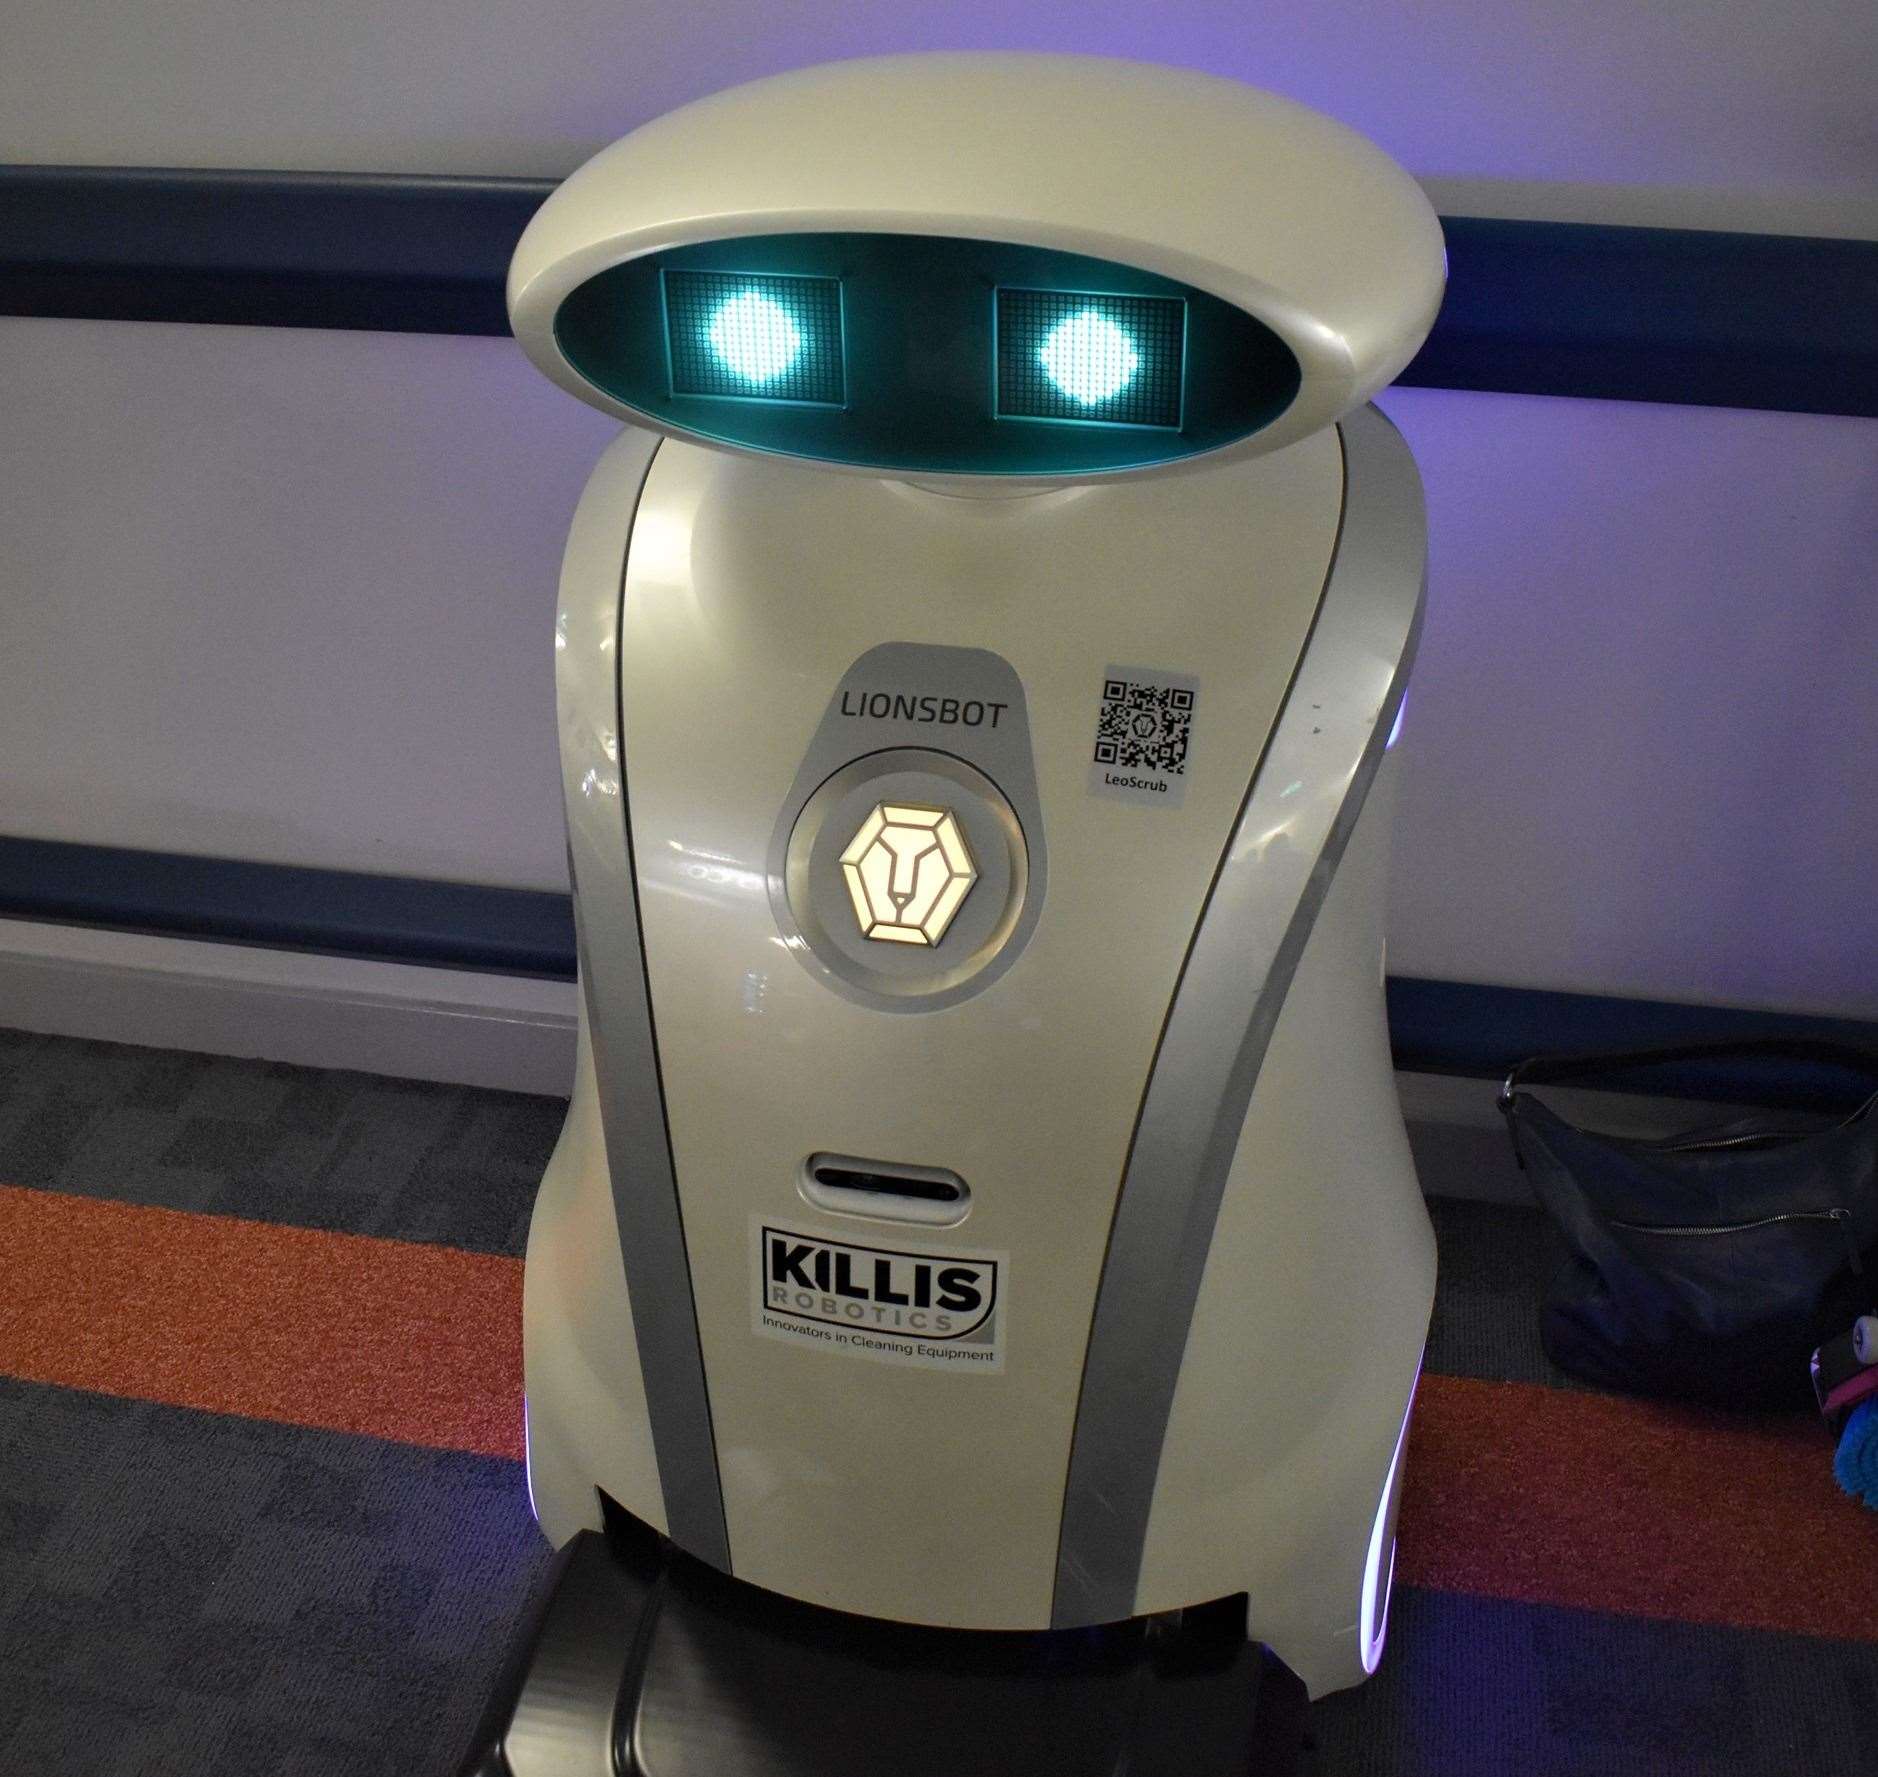 Some staff have raised concerns about their automated colleague. Photo: Dartford and Gravesham Hospital Trust Facebook